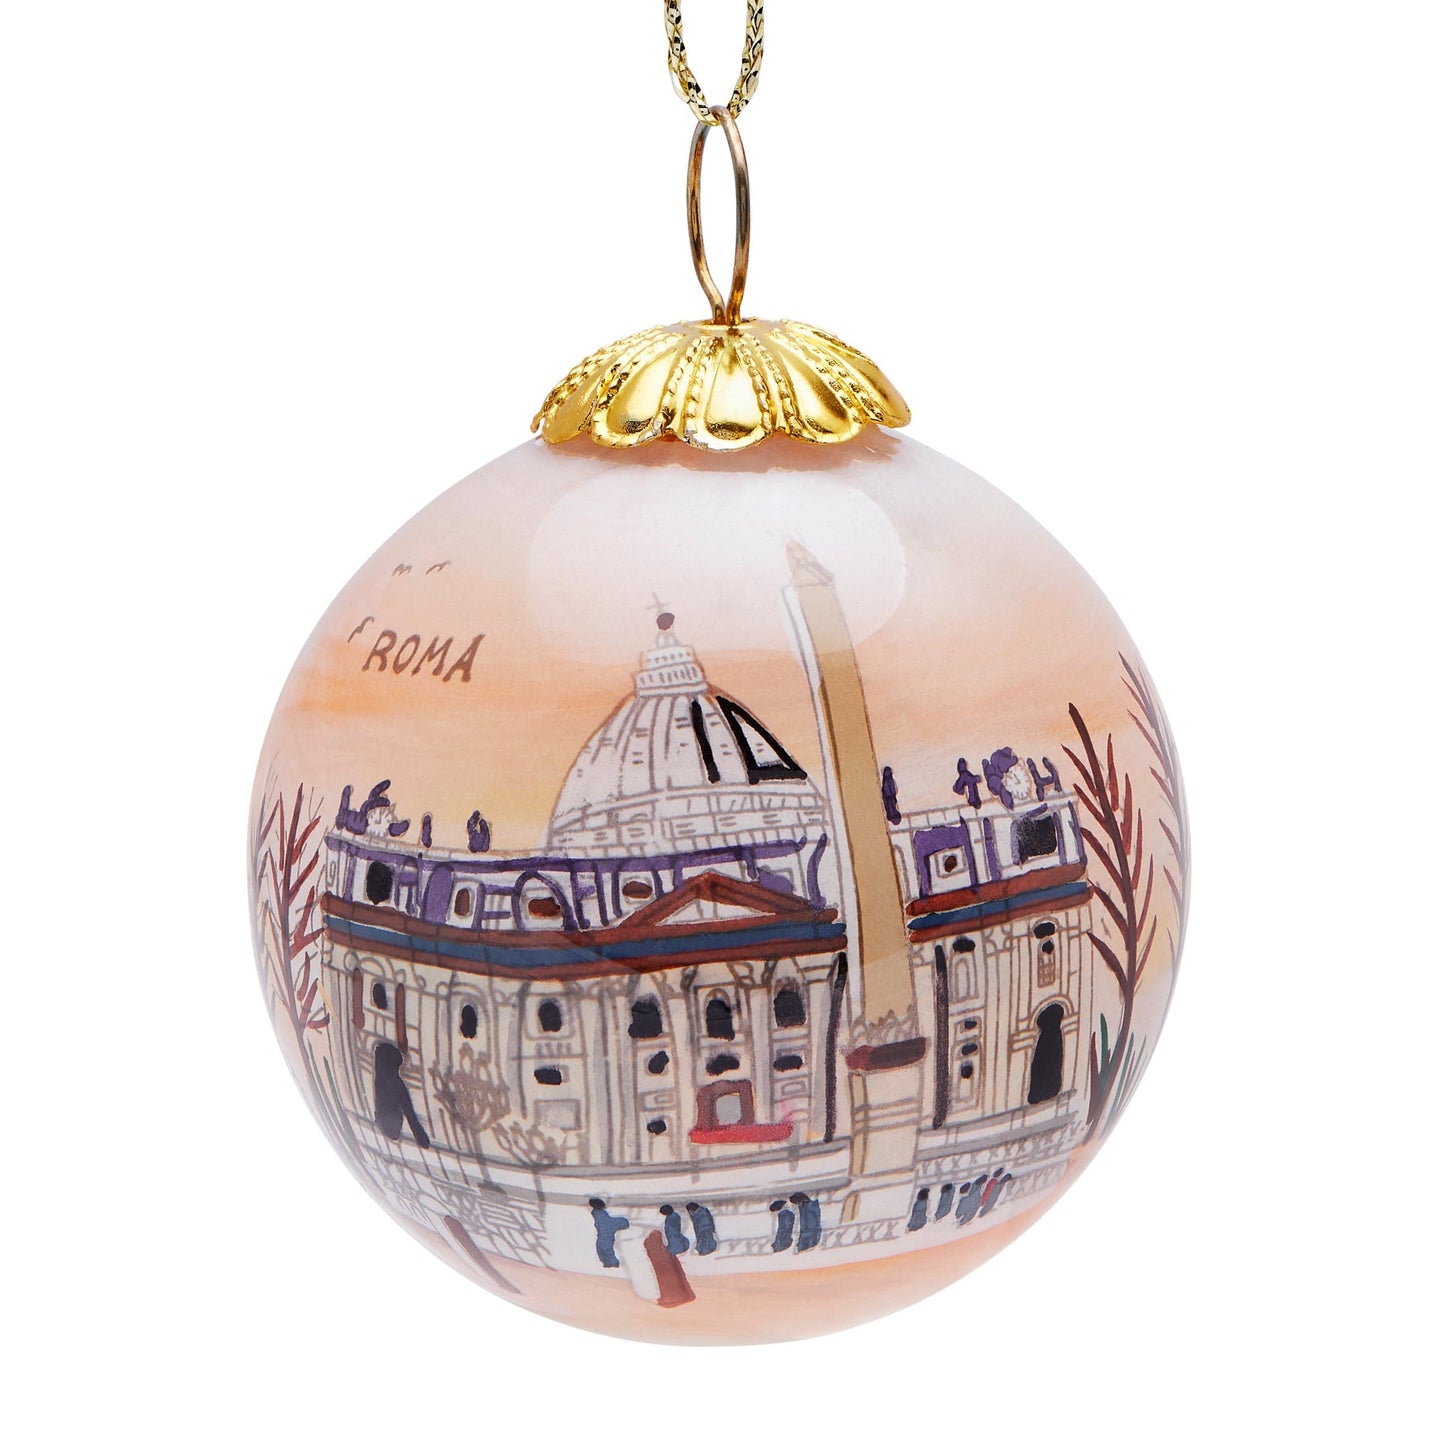 MONDO CATTOLICO Cm 6 (2.4 inches) Christmas Tree Ball of Saint Peter Basilica at Sunset